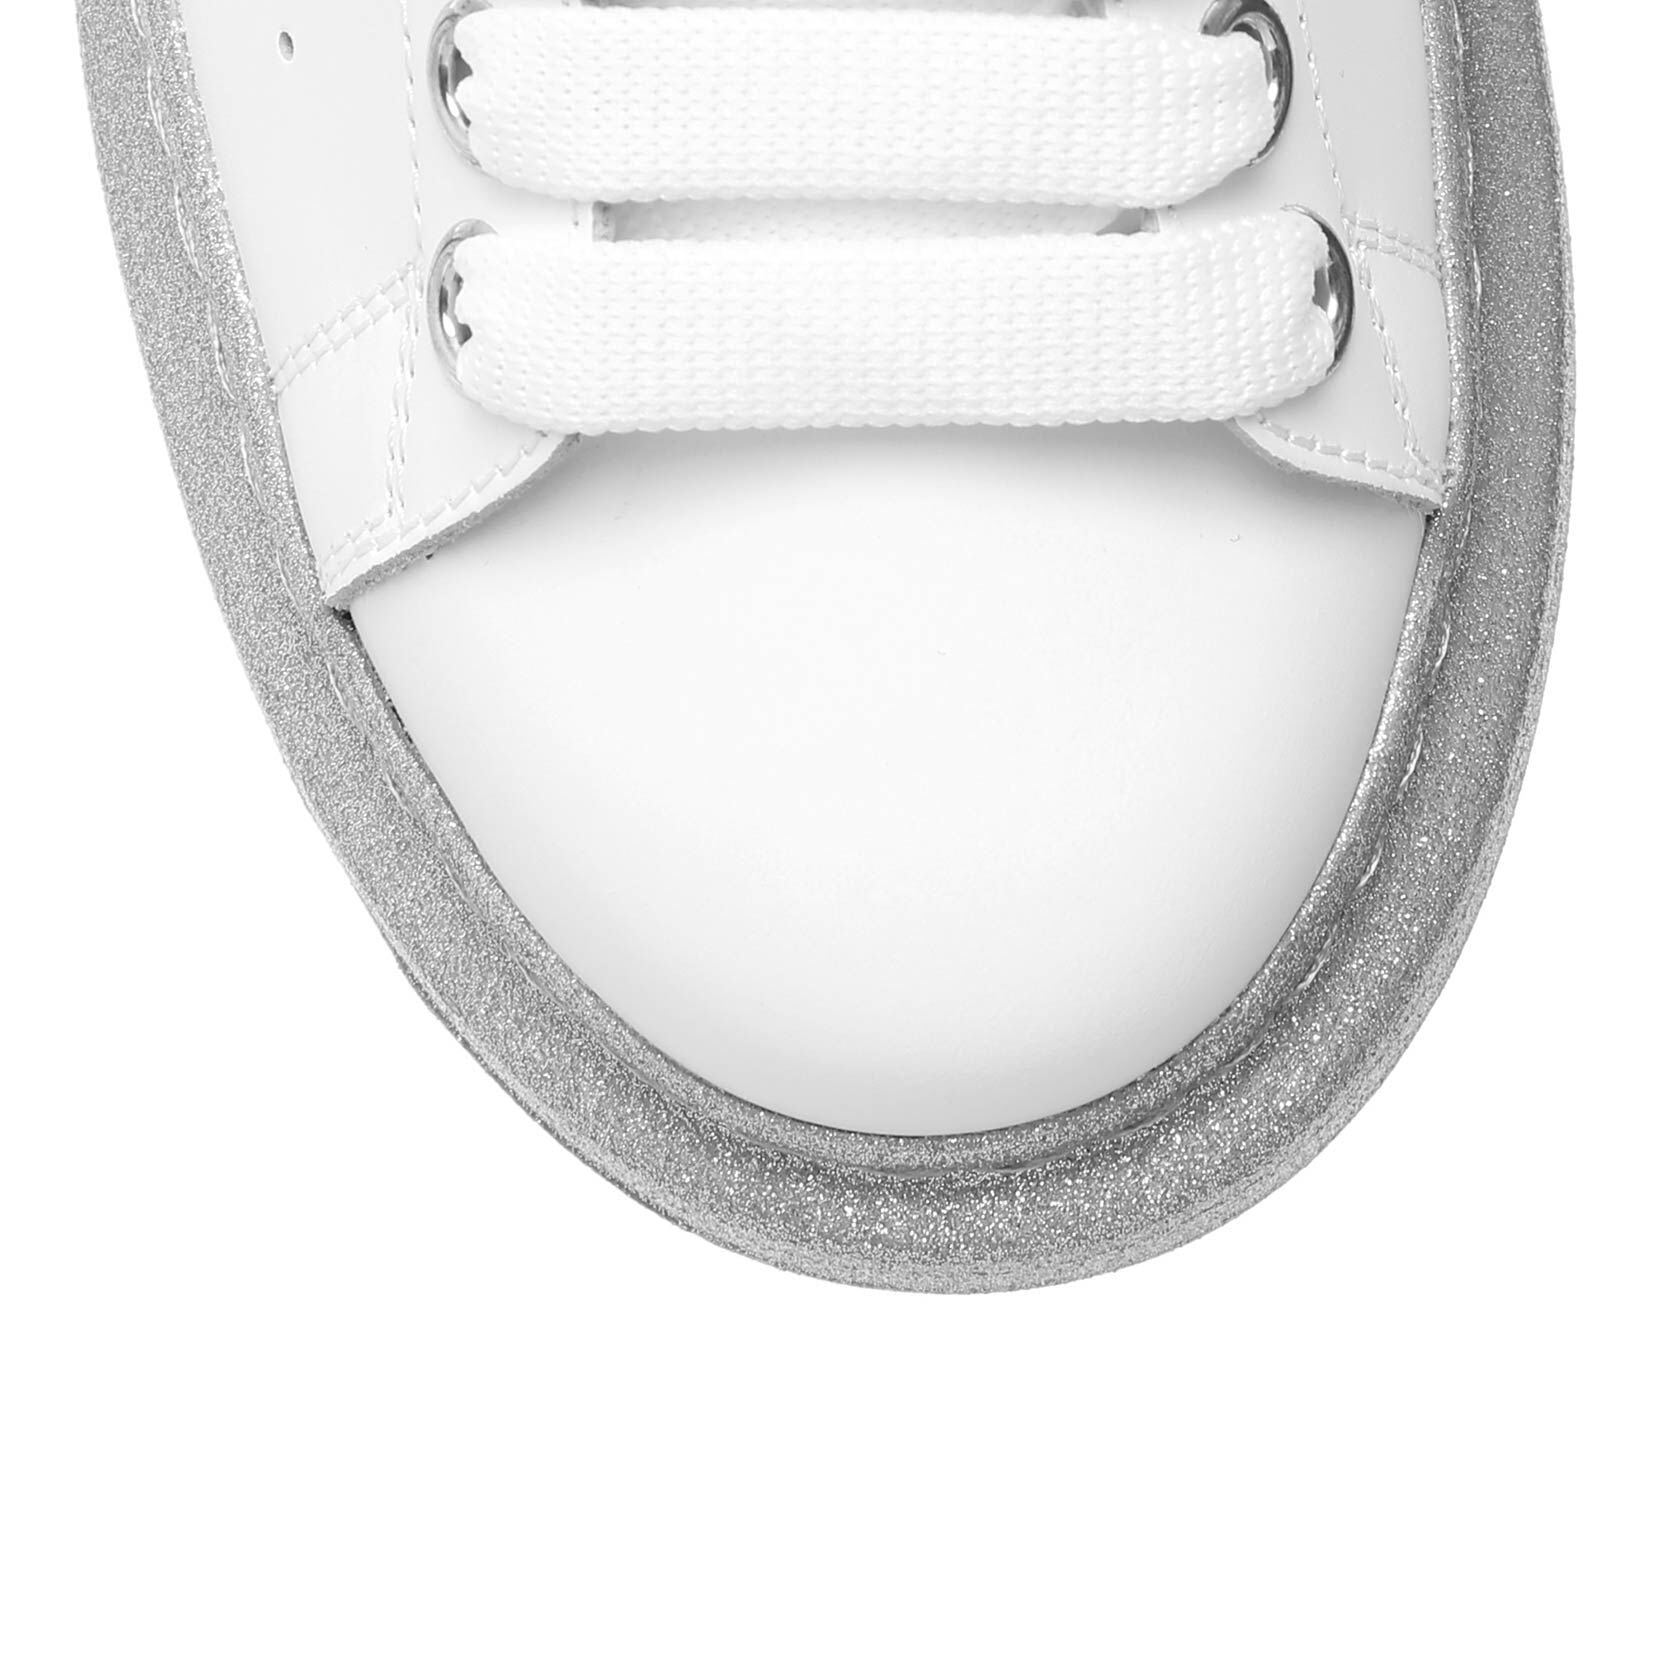 White and silver sole classic sneakers